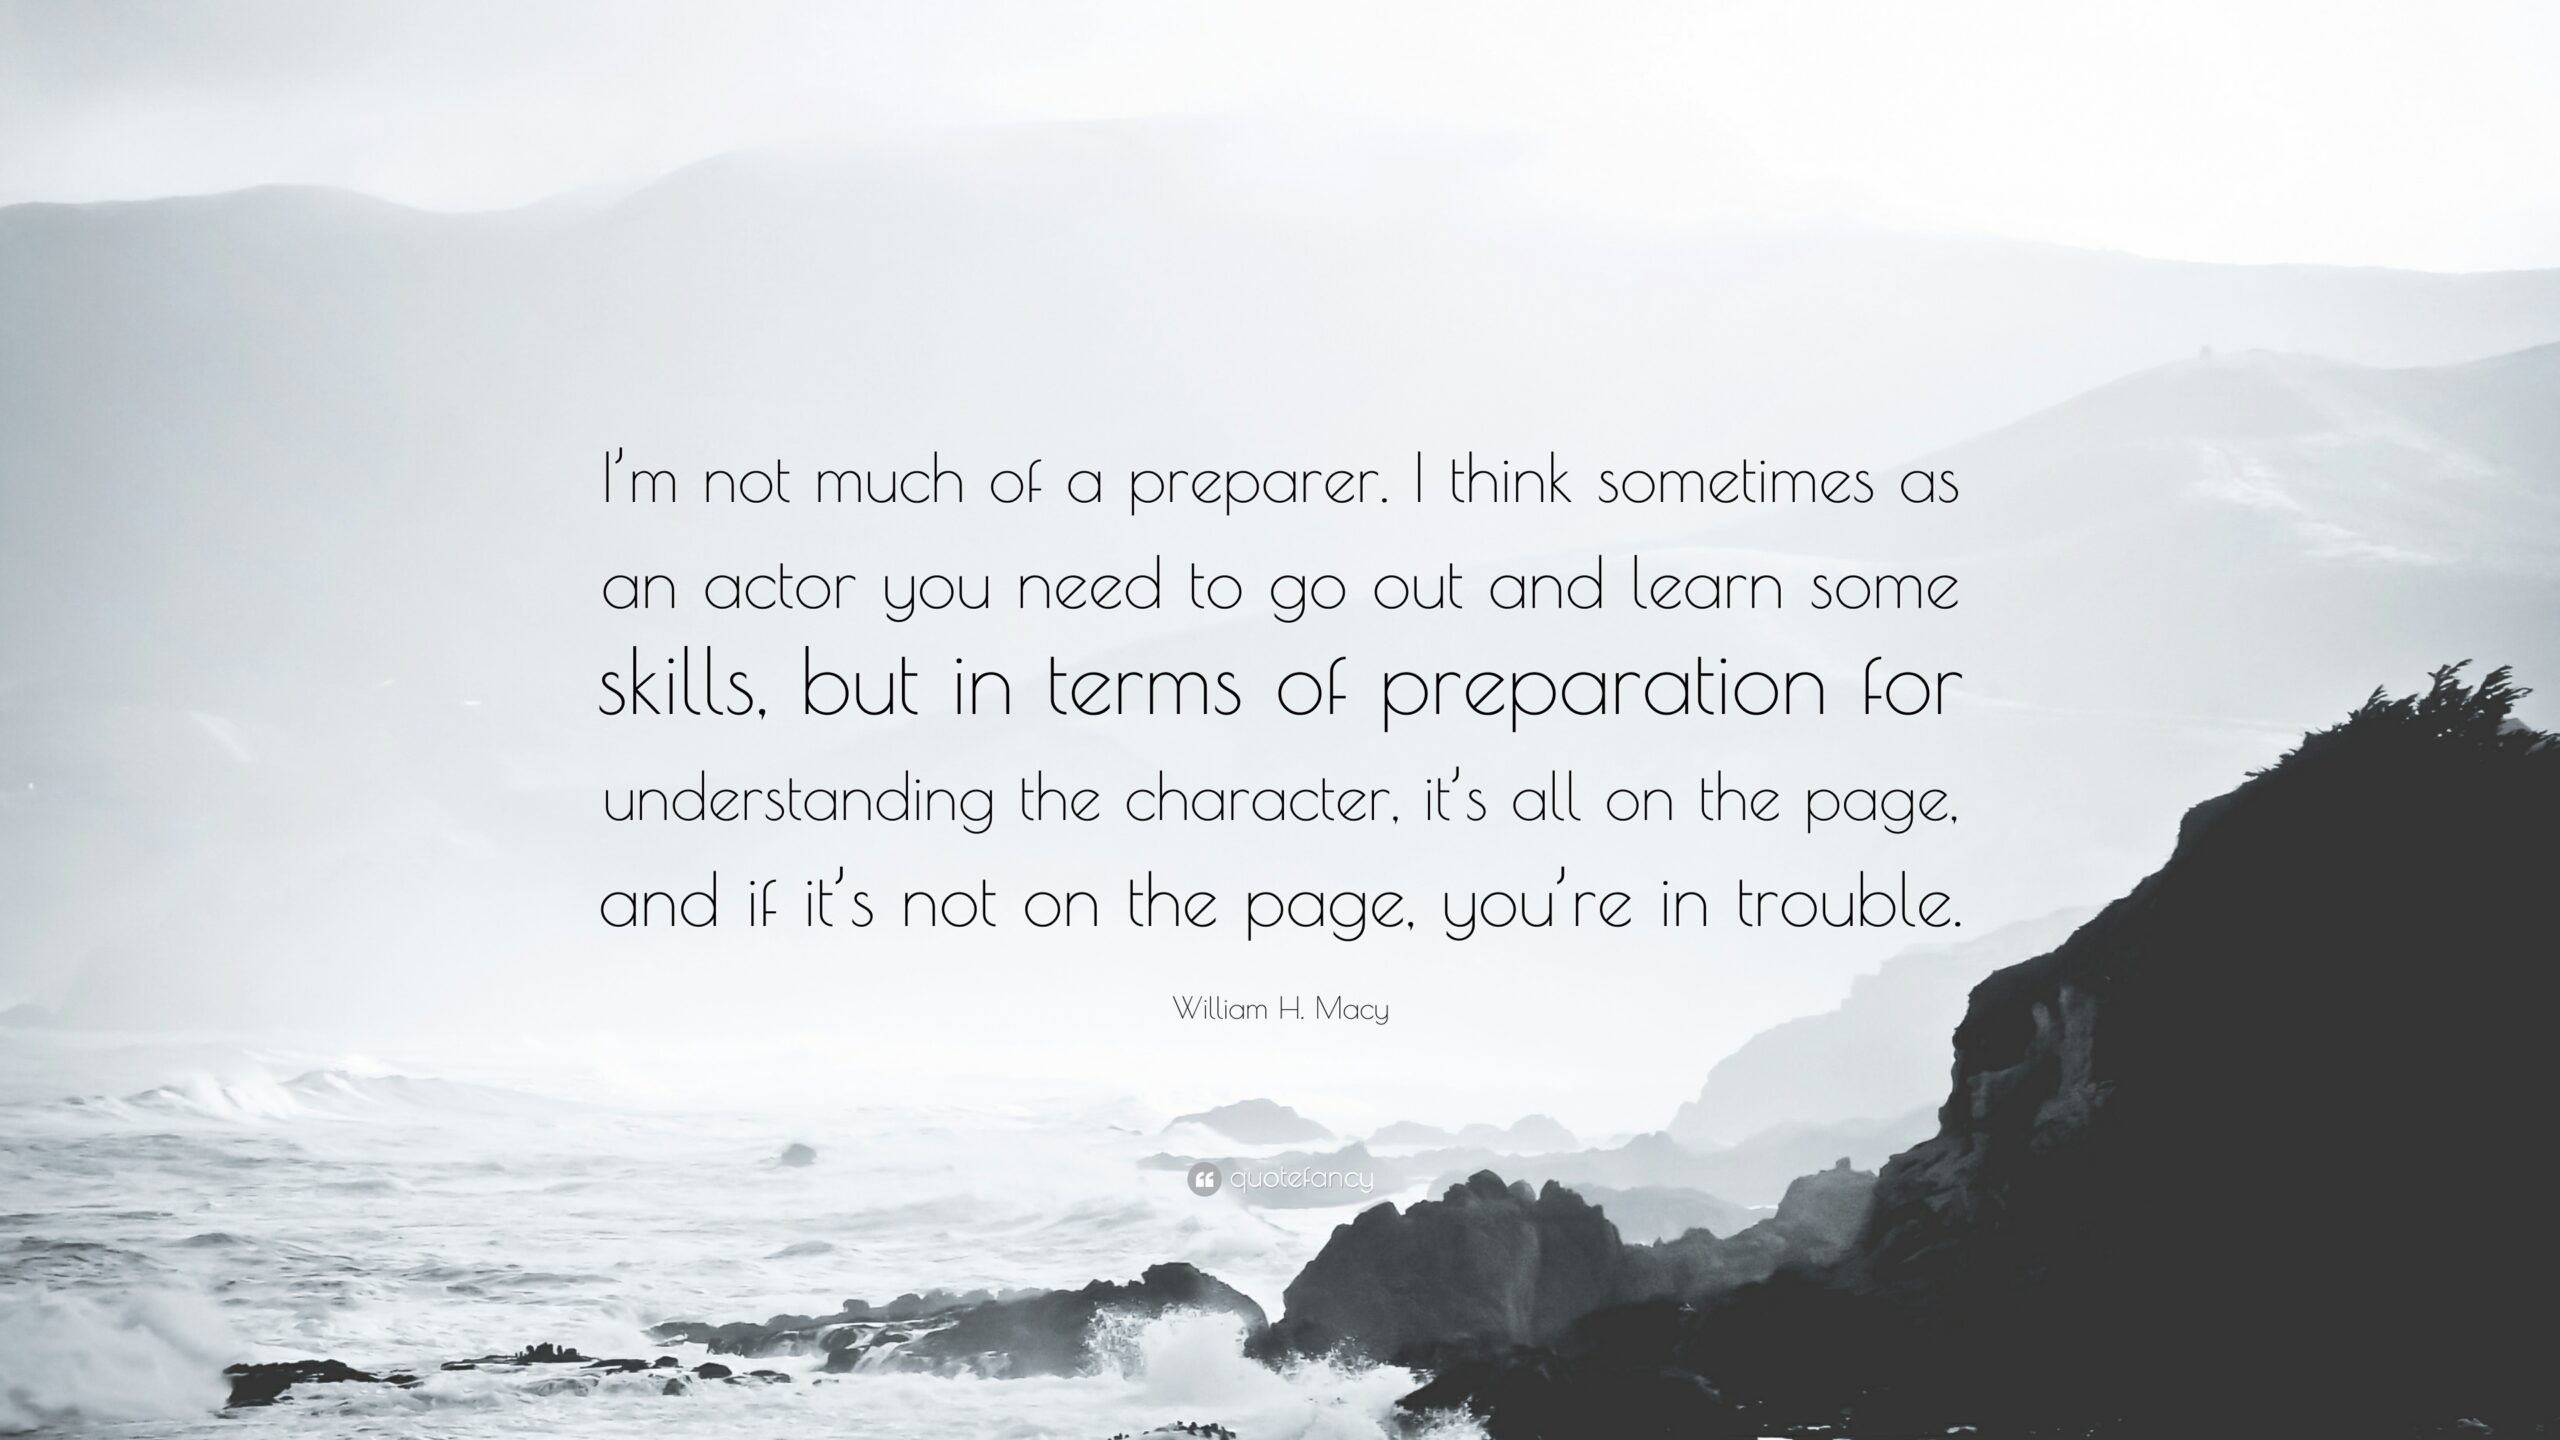 William H Macy Quote “I’m not much of a preparer I think